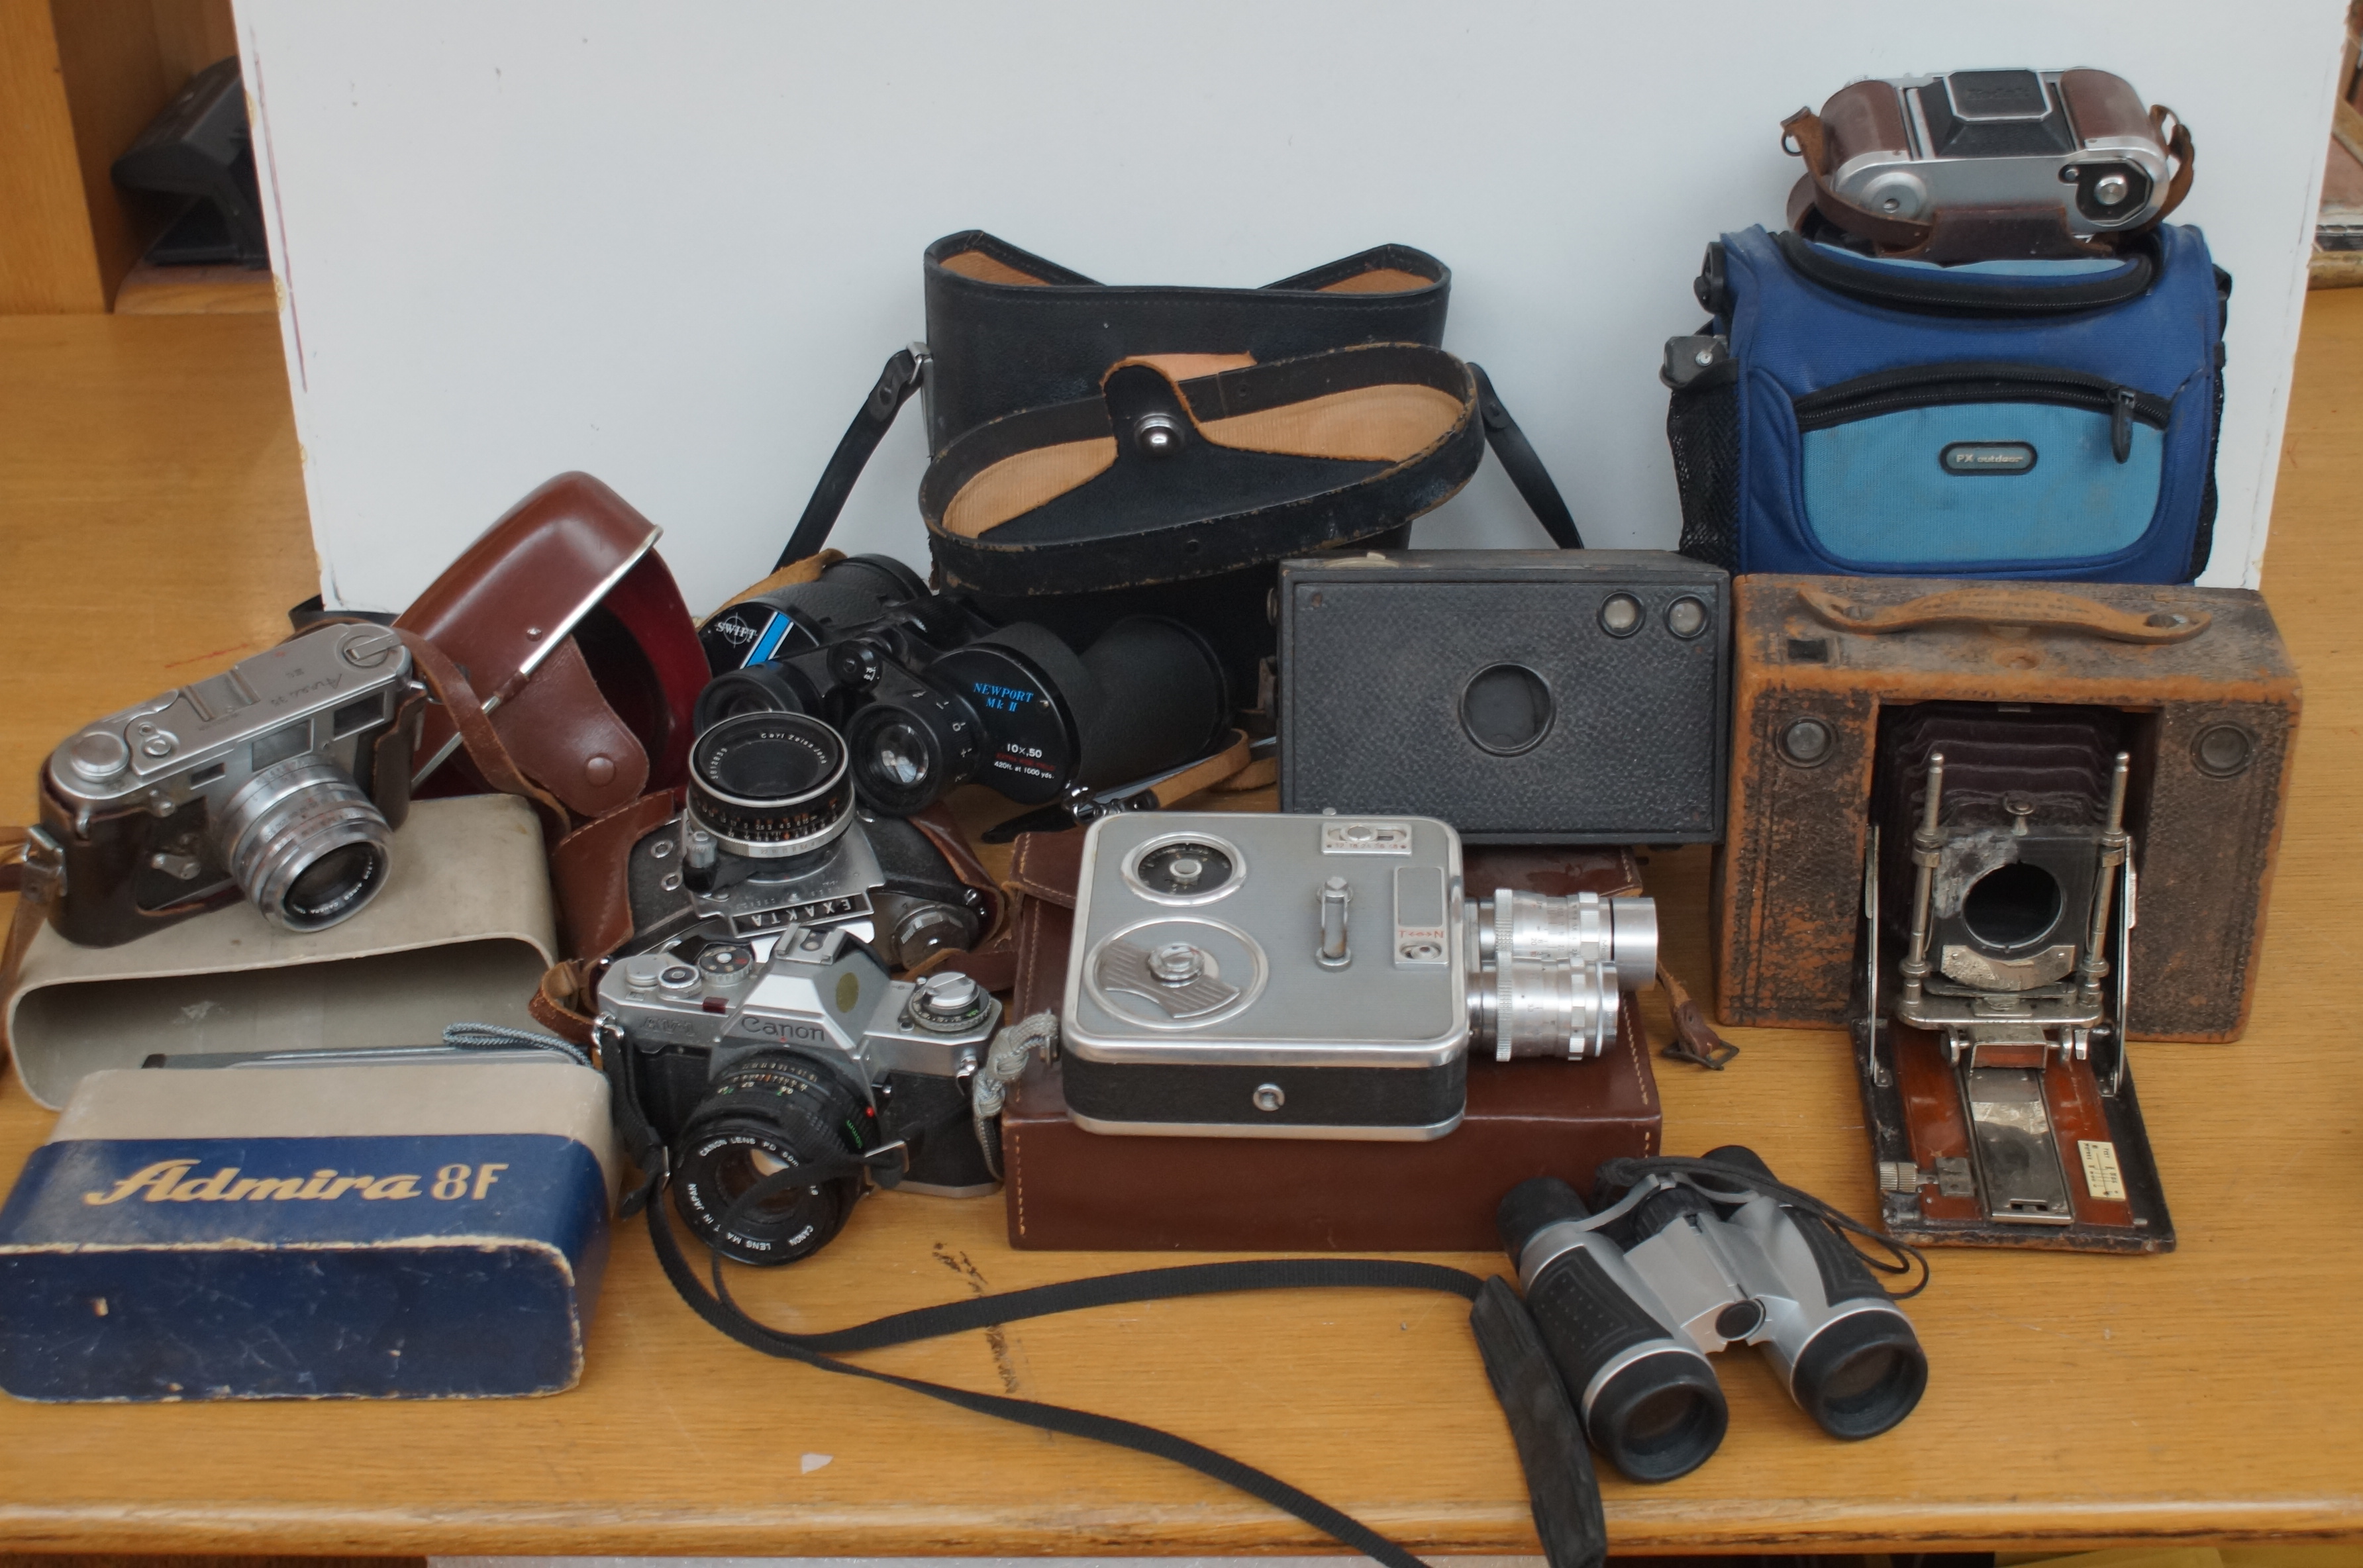 Large collection of vintage cameras & equipment